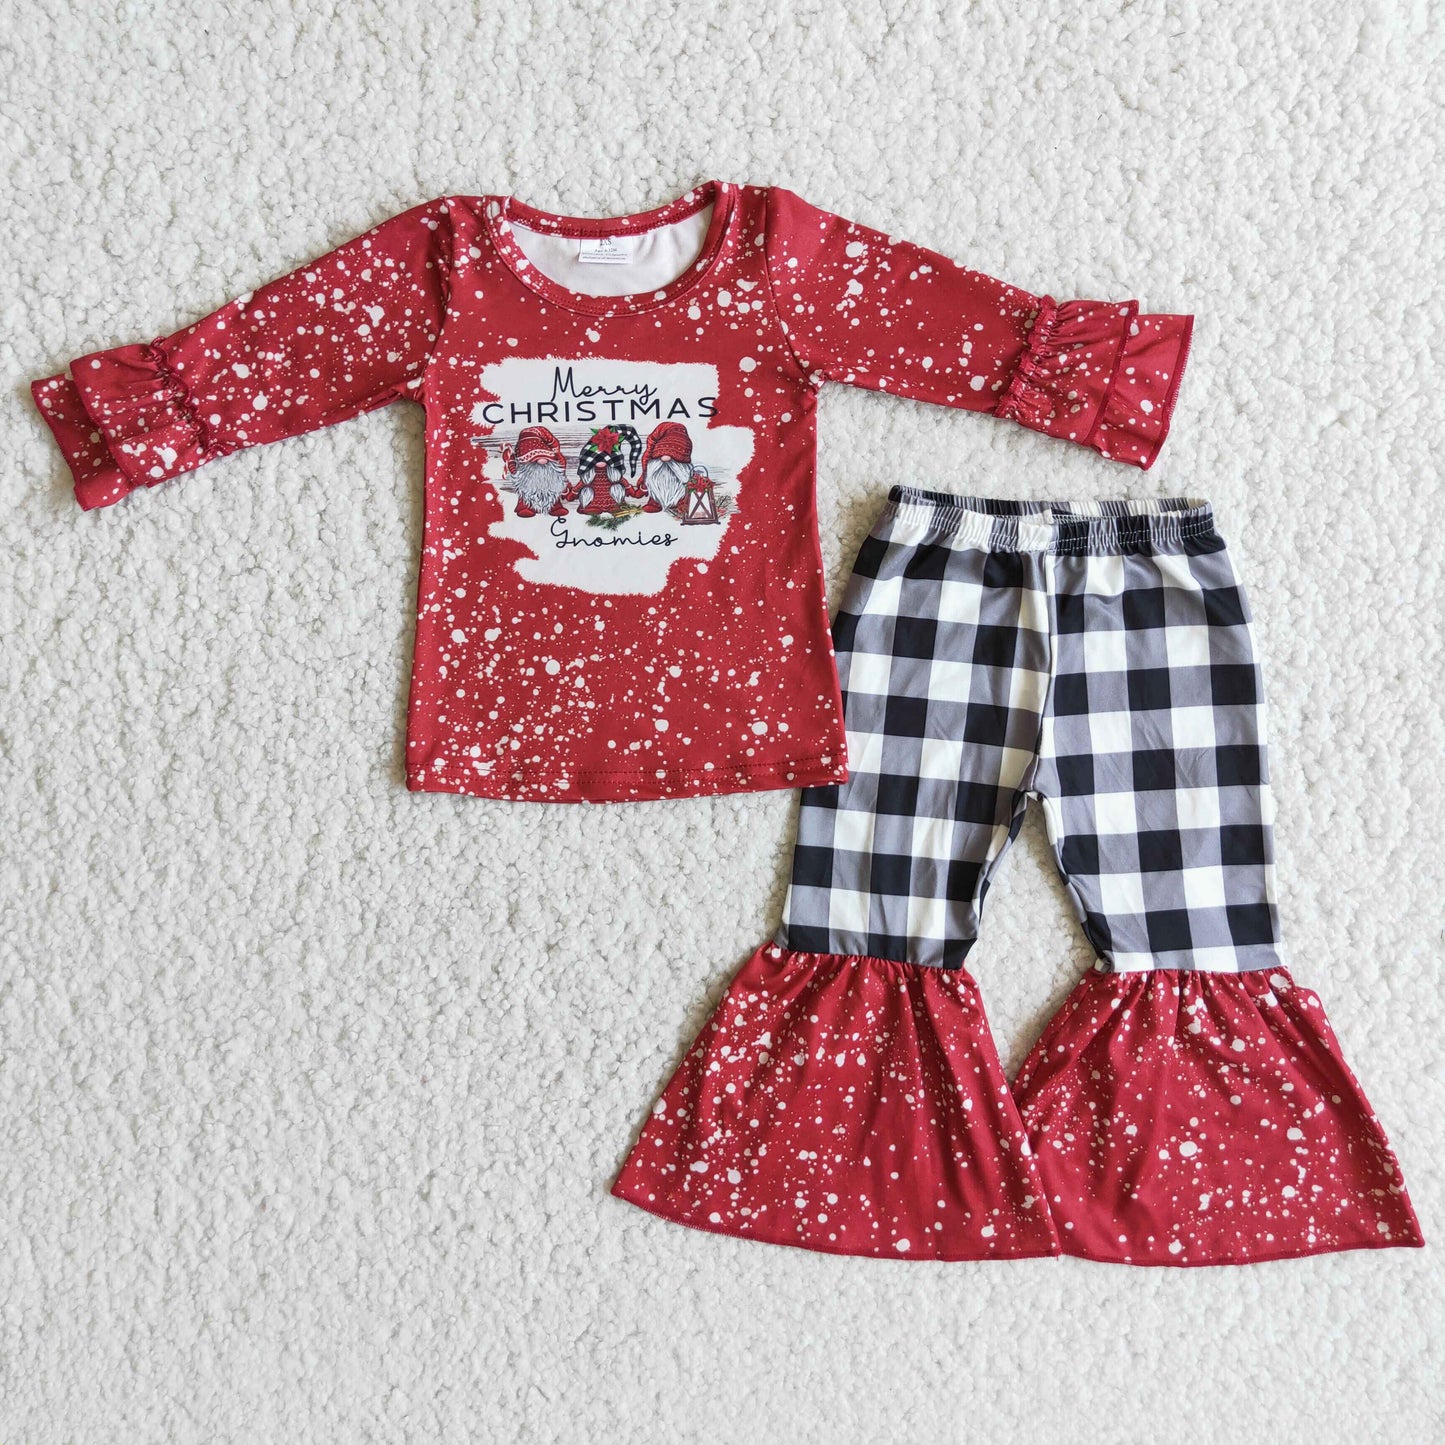 Merry Christmas gnomies baby kids outfits